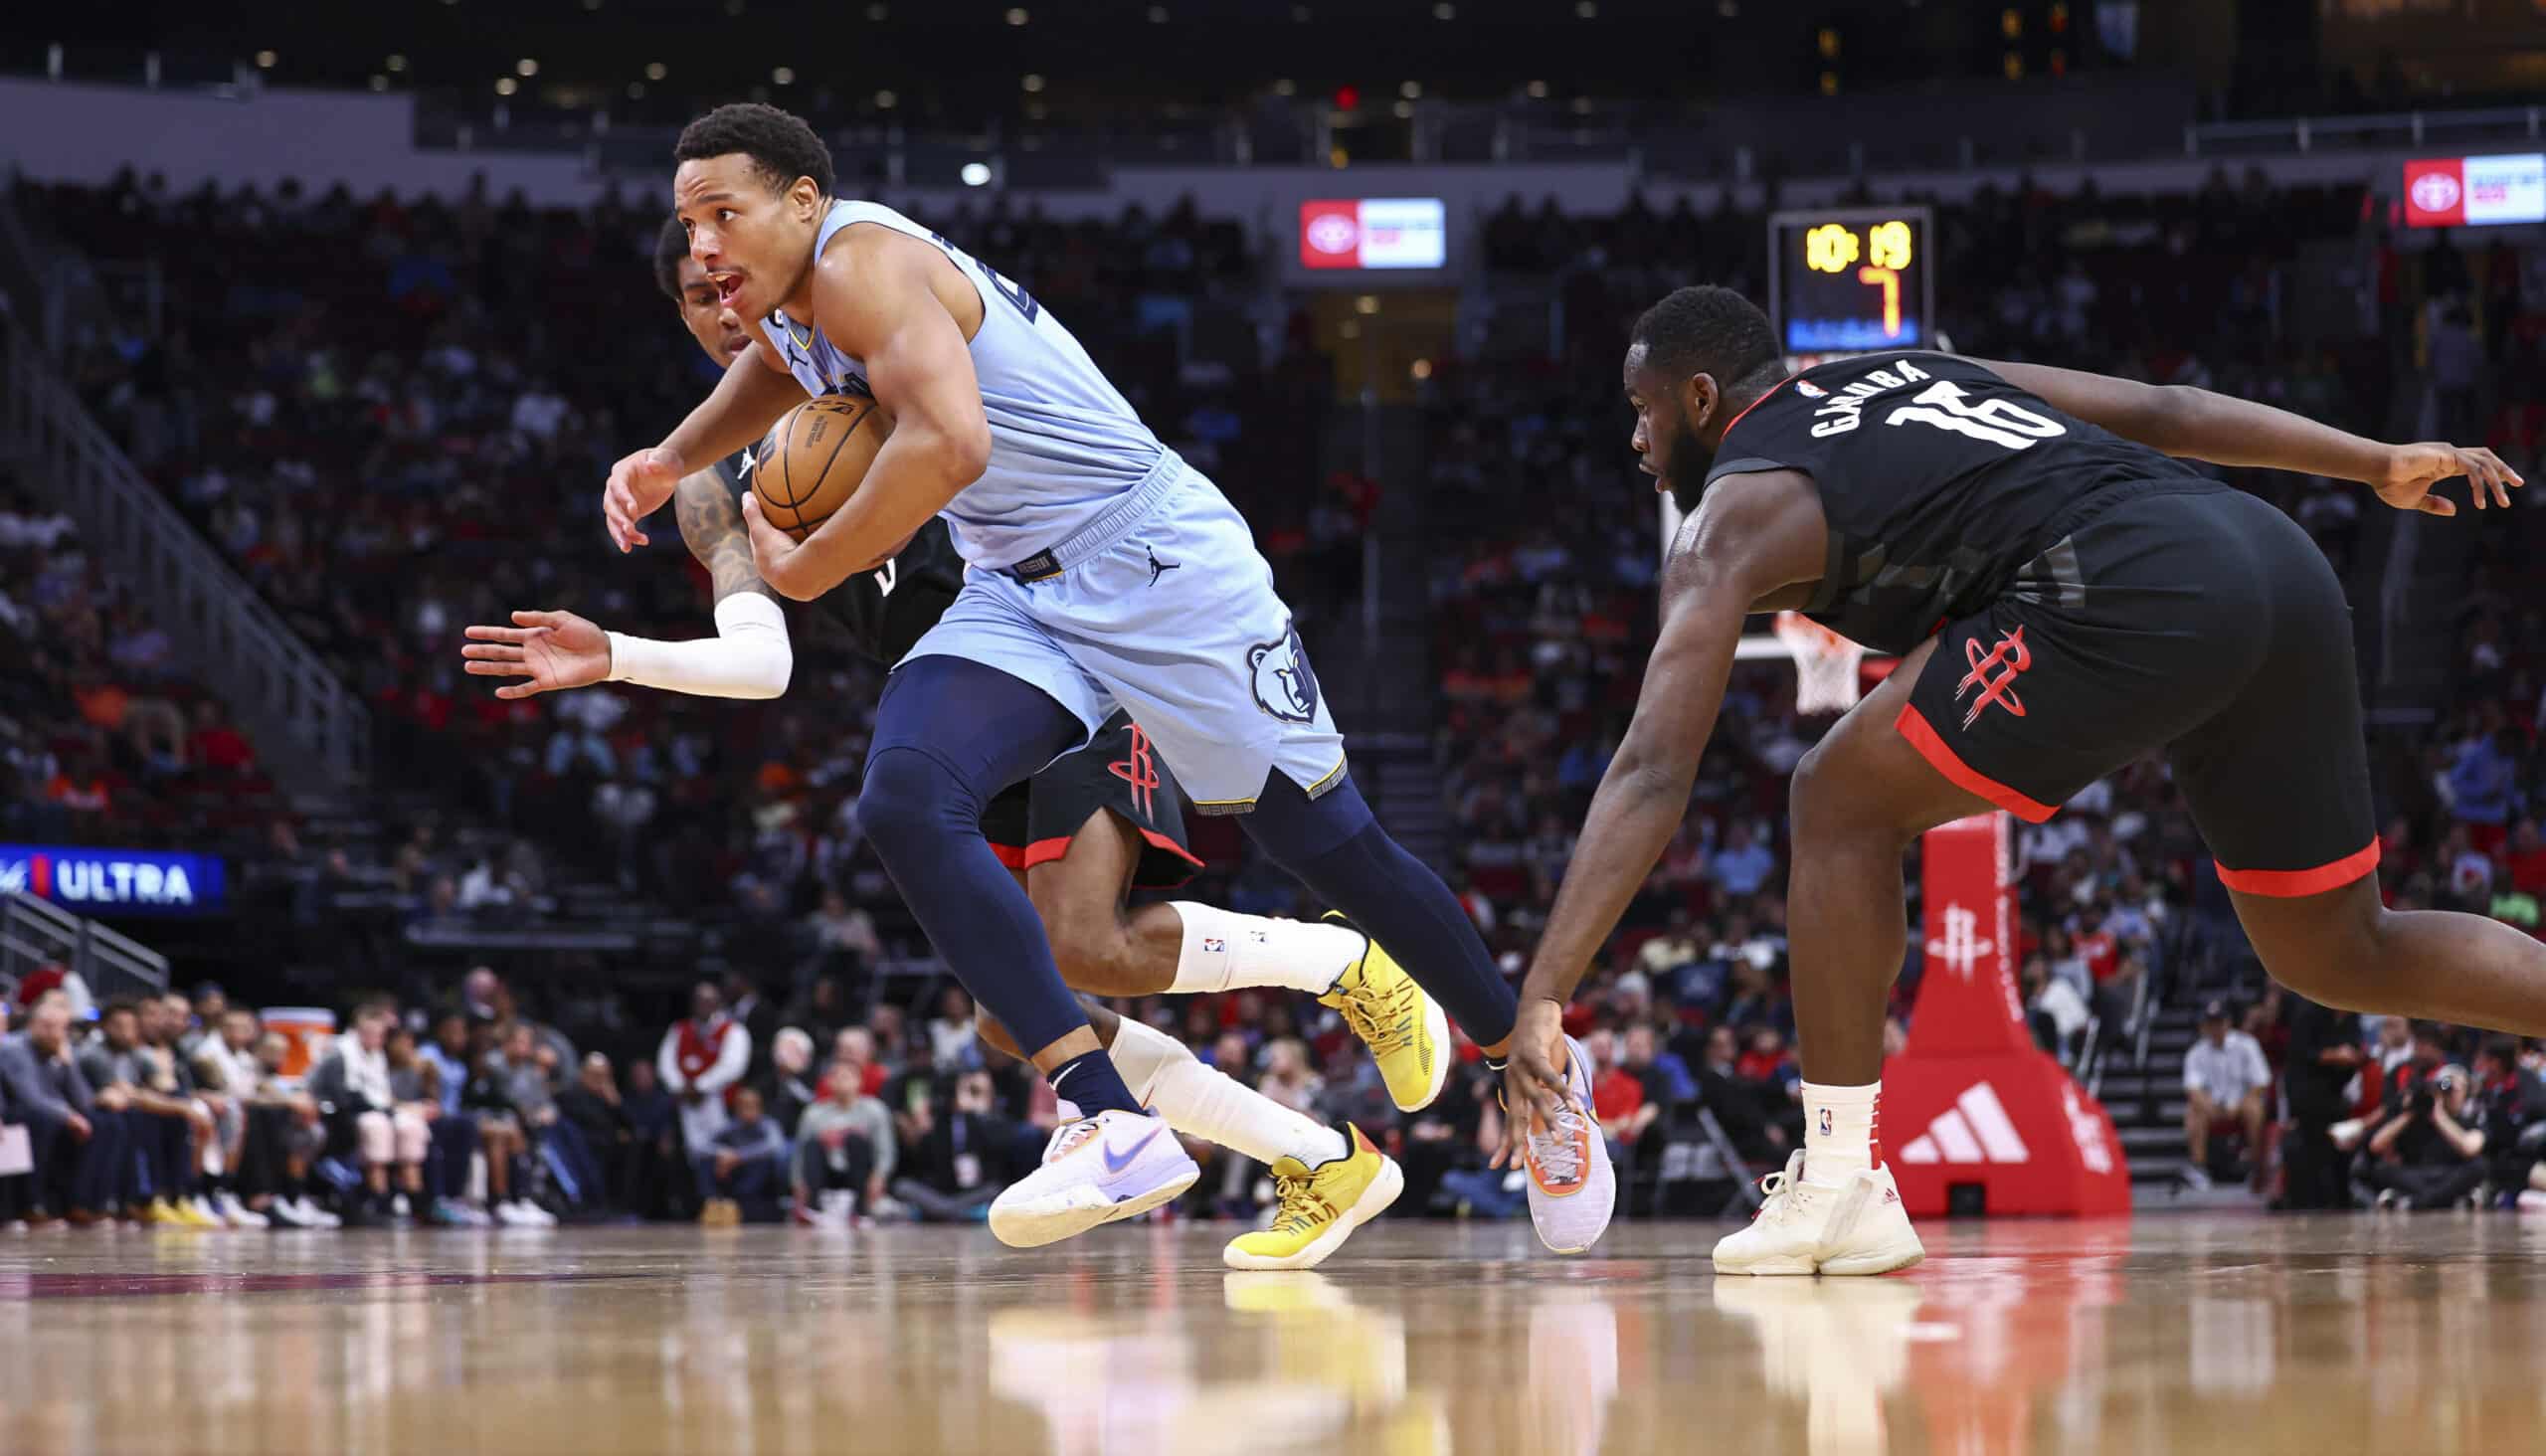 Featured image for “Grizzlies knock off hapless Rockets 113-99 thanks to strong third quarter showing”